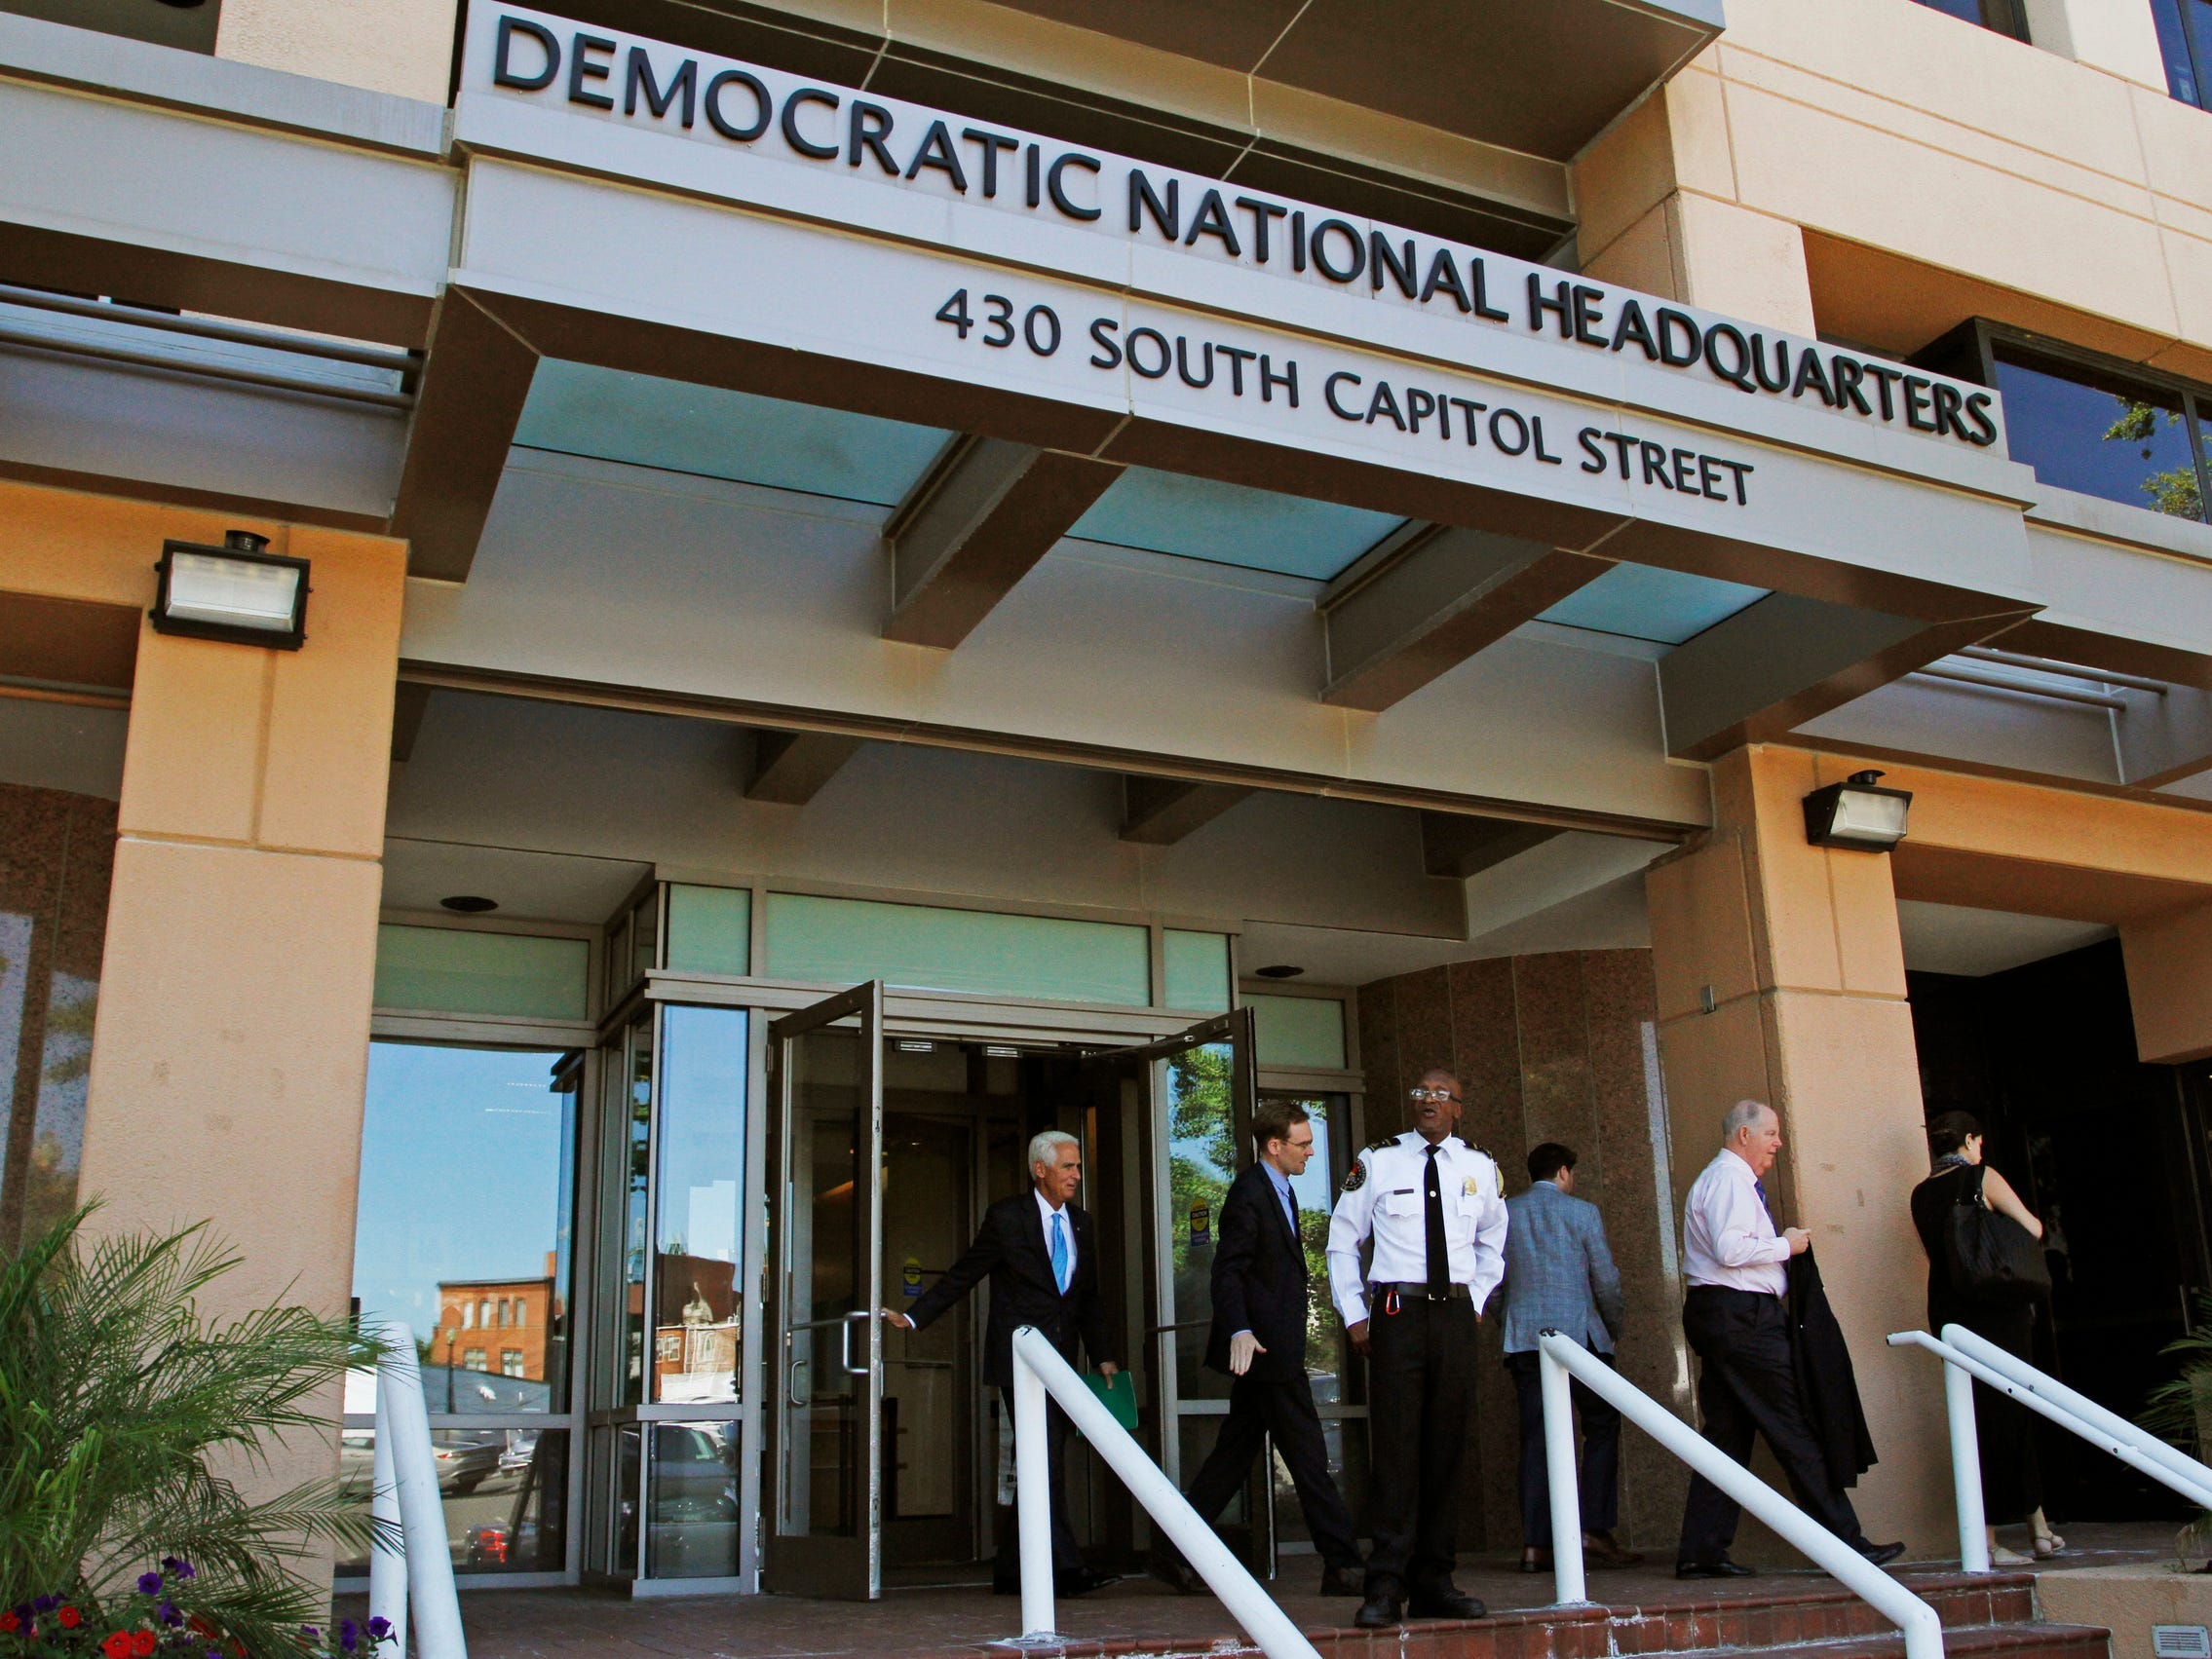 The entrance to the Democratic National Committee (DNC) headquarters in Washington photographed on June 14, 2016.